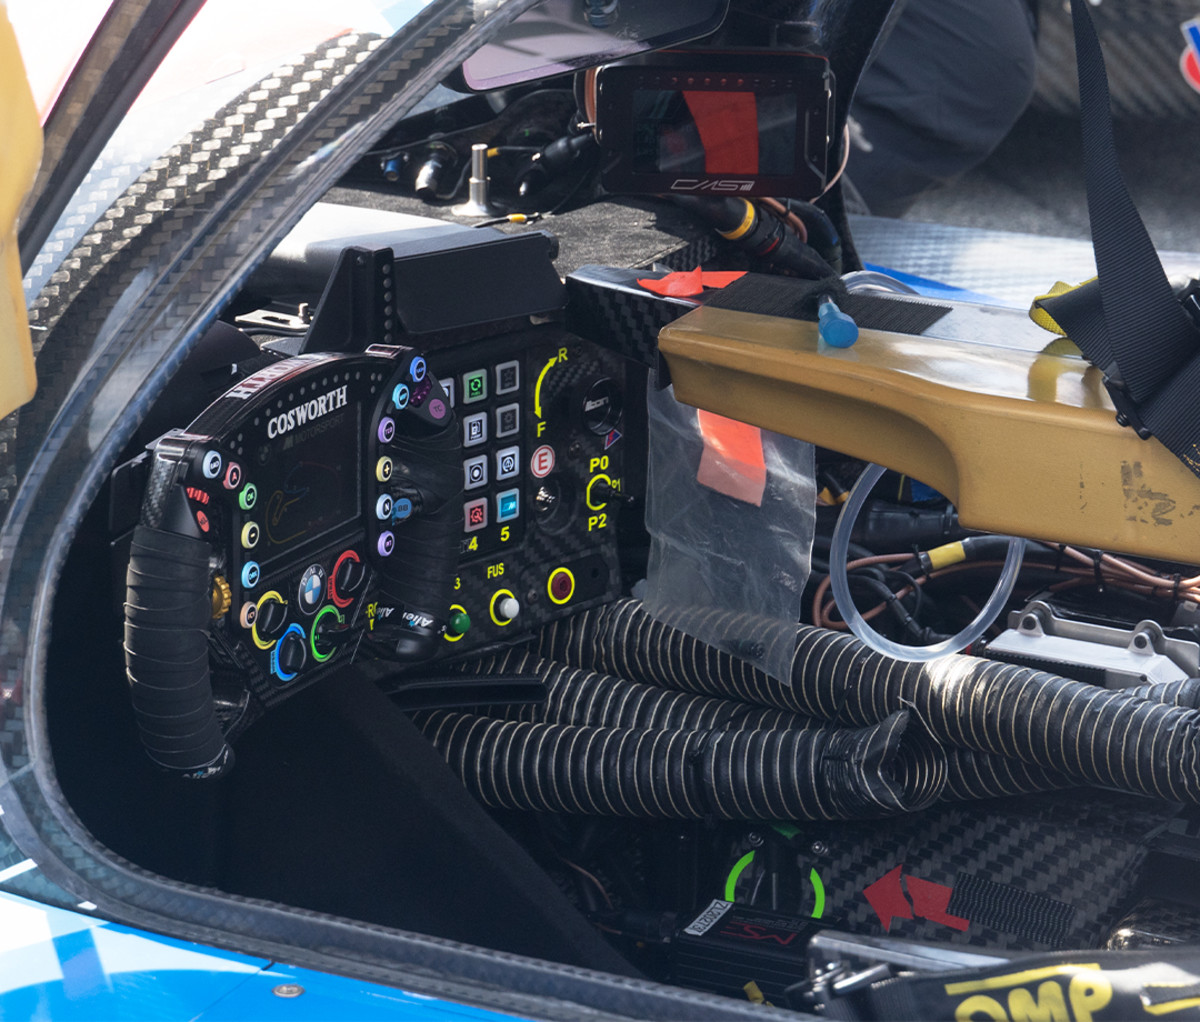 Complicated controls in the cockpit of a 24 Hours of Daytona racecar.